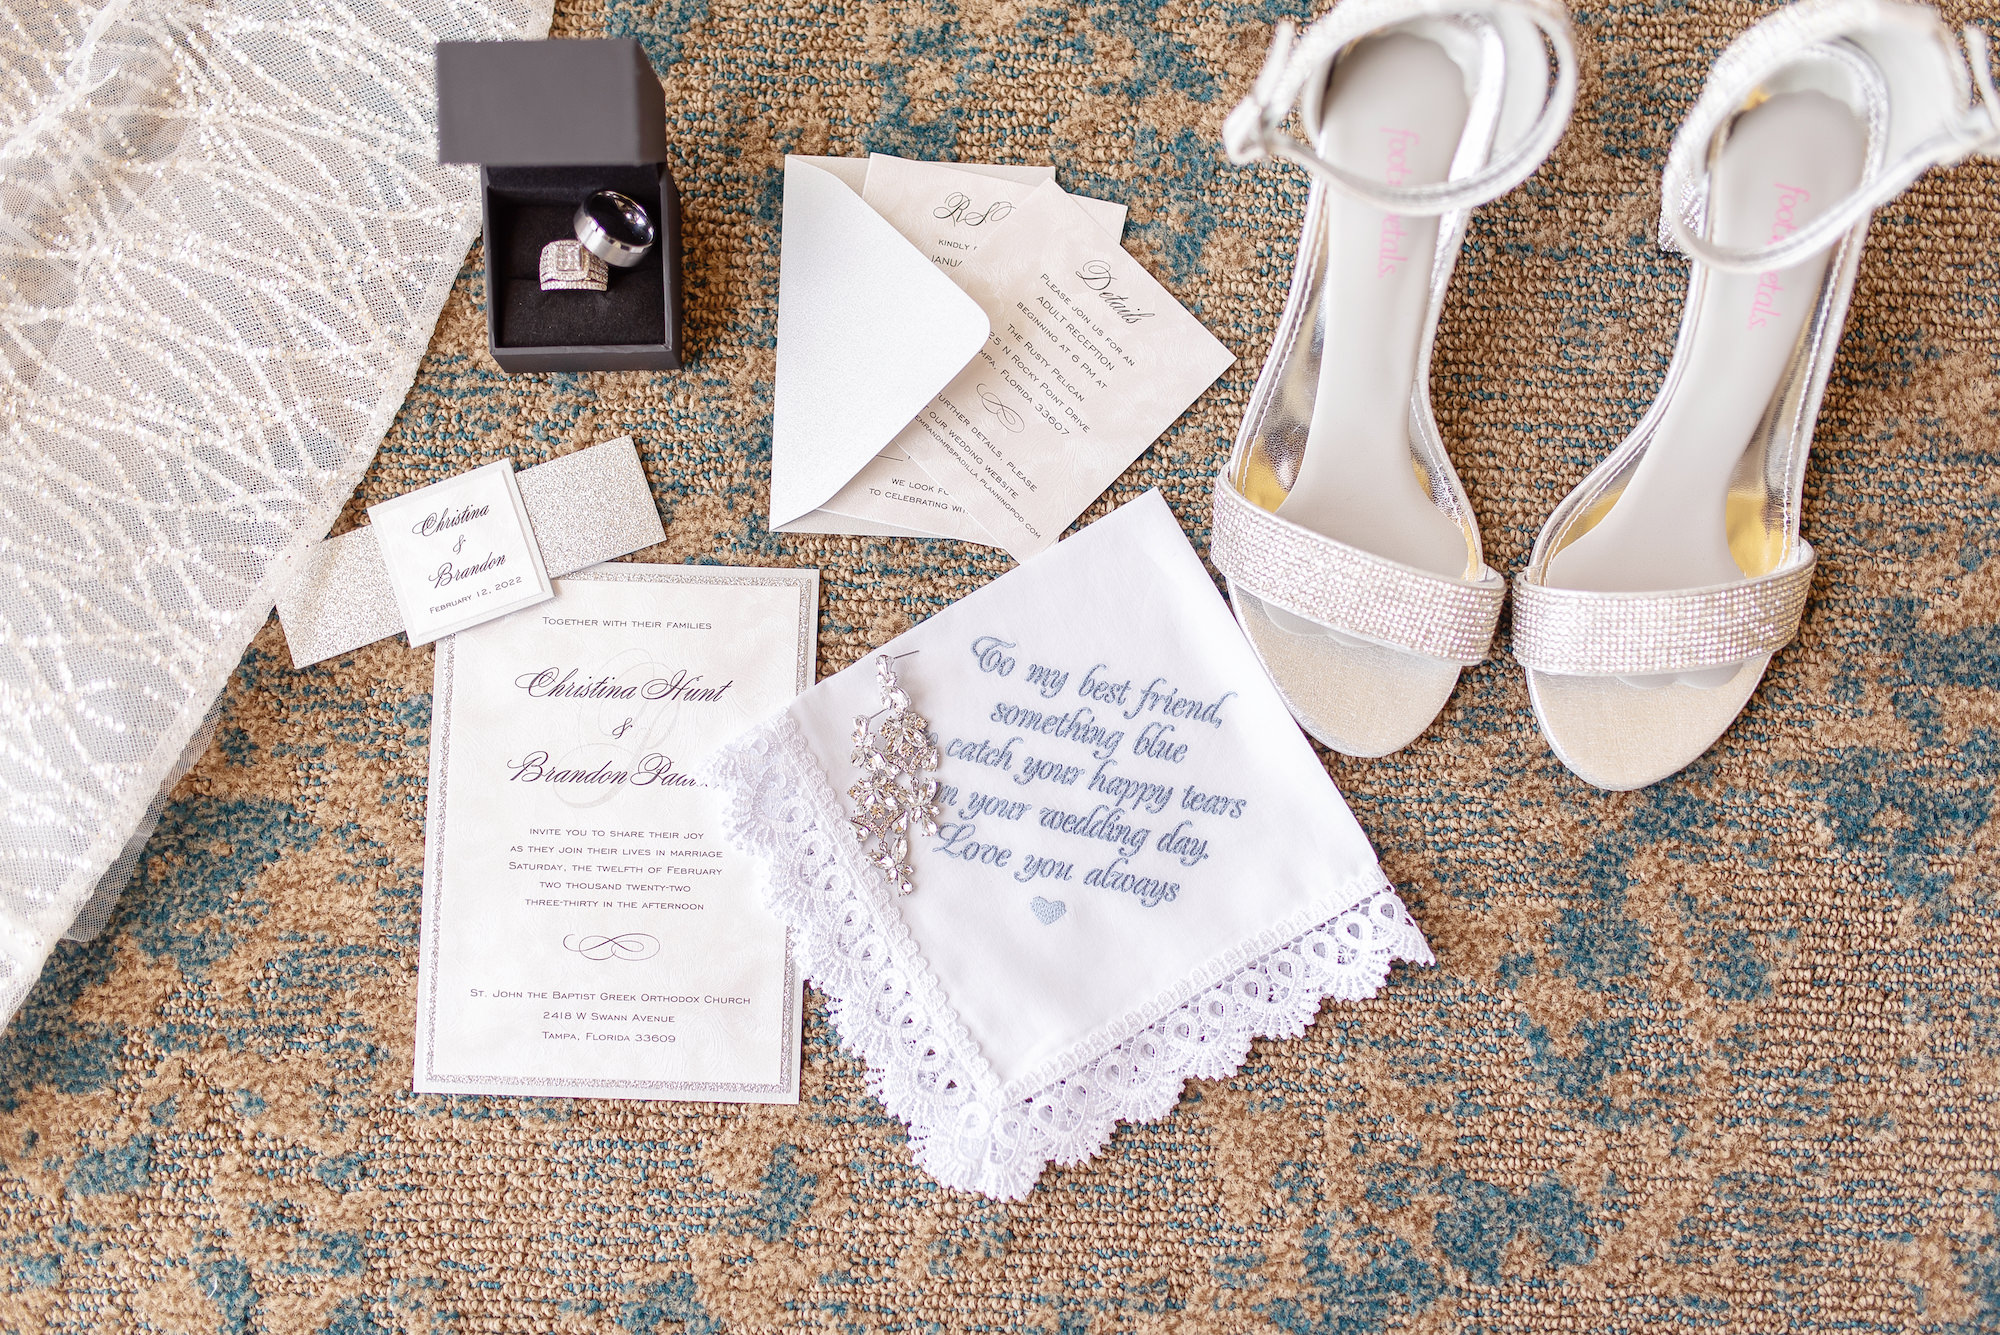 White Open Toed Heels with Handkerchief Something Blue | Classic White Wedding Invitations | Tampa Bay Wedding Planner Special Moments Event Planning